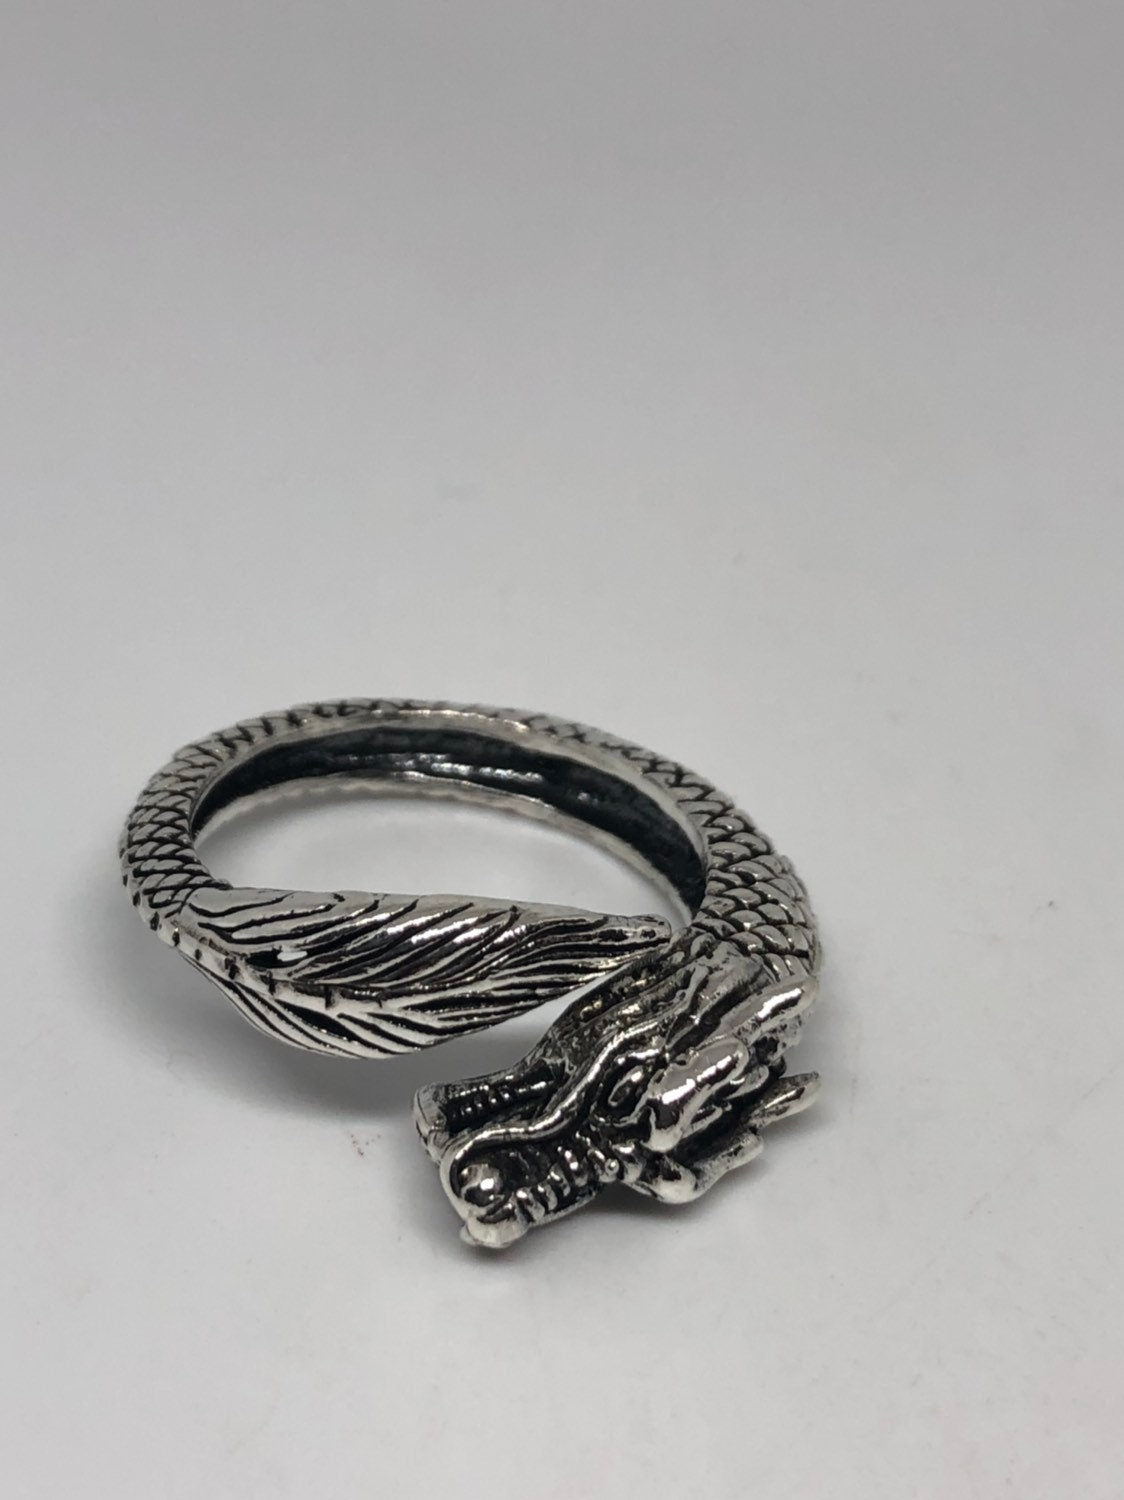 Vintage Gothic Dragon Sterling Silver Mens Ring